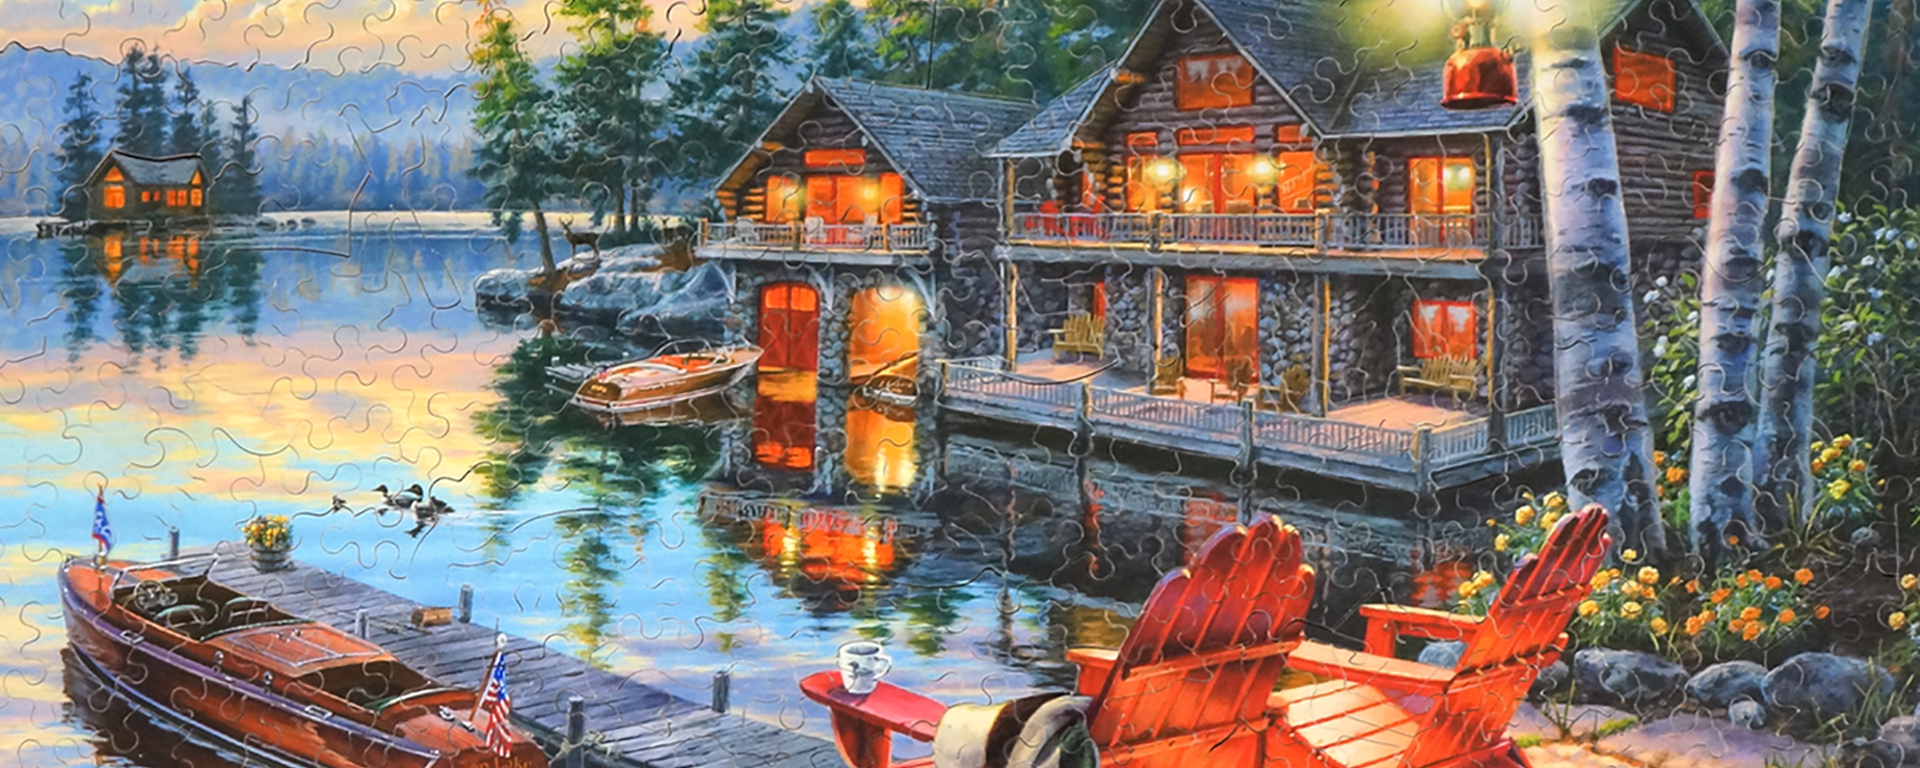 Wooden cabin jigsaw puzzle depicting a peaceful scene of a beautiful mountain landscape with lush green trees on the lakes edge and elaborate two story cabins nestled in the woods